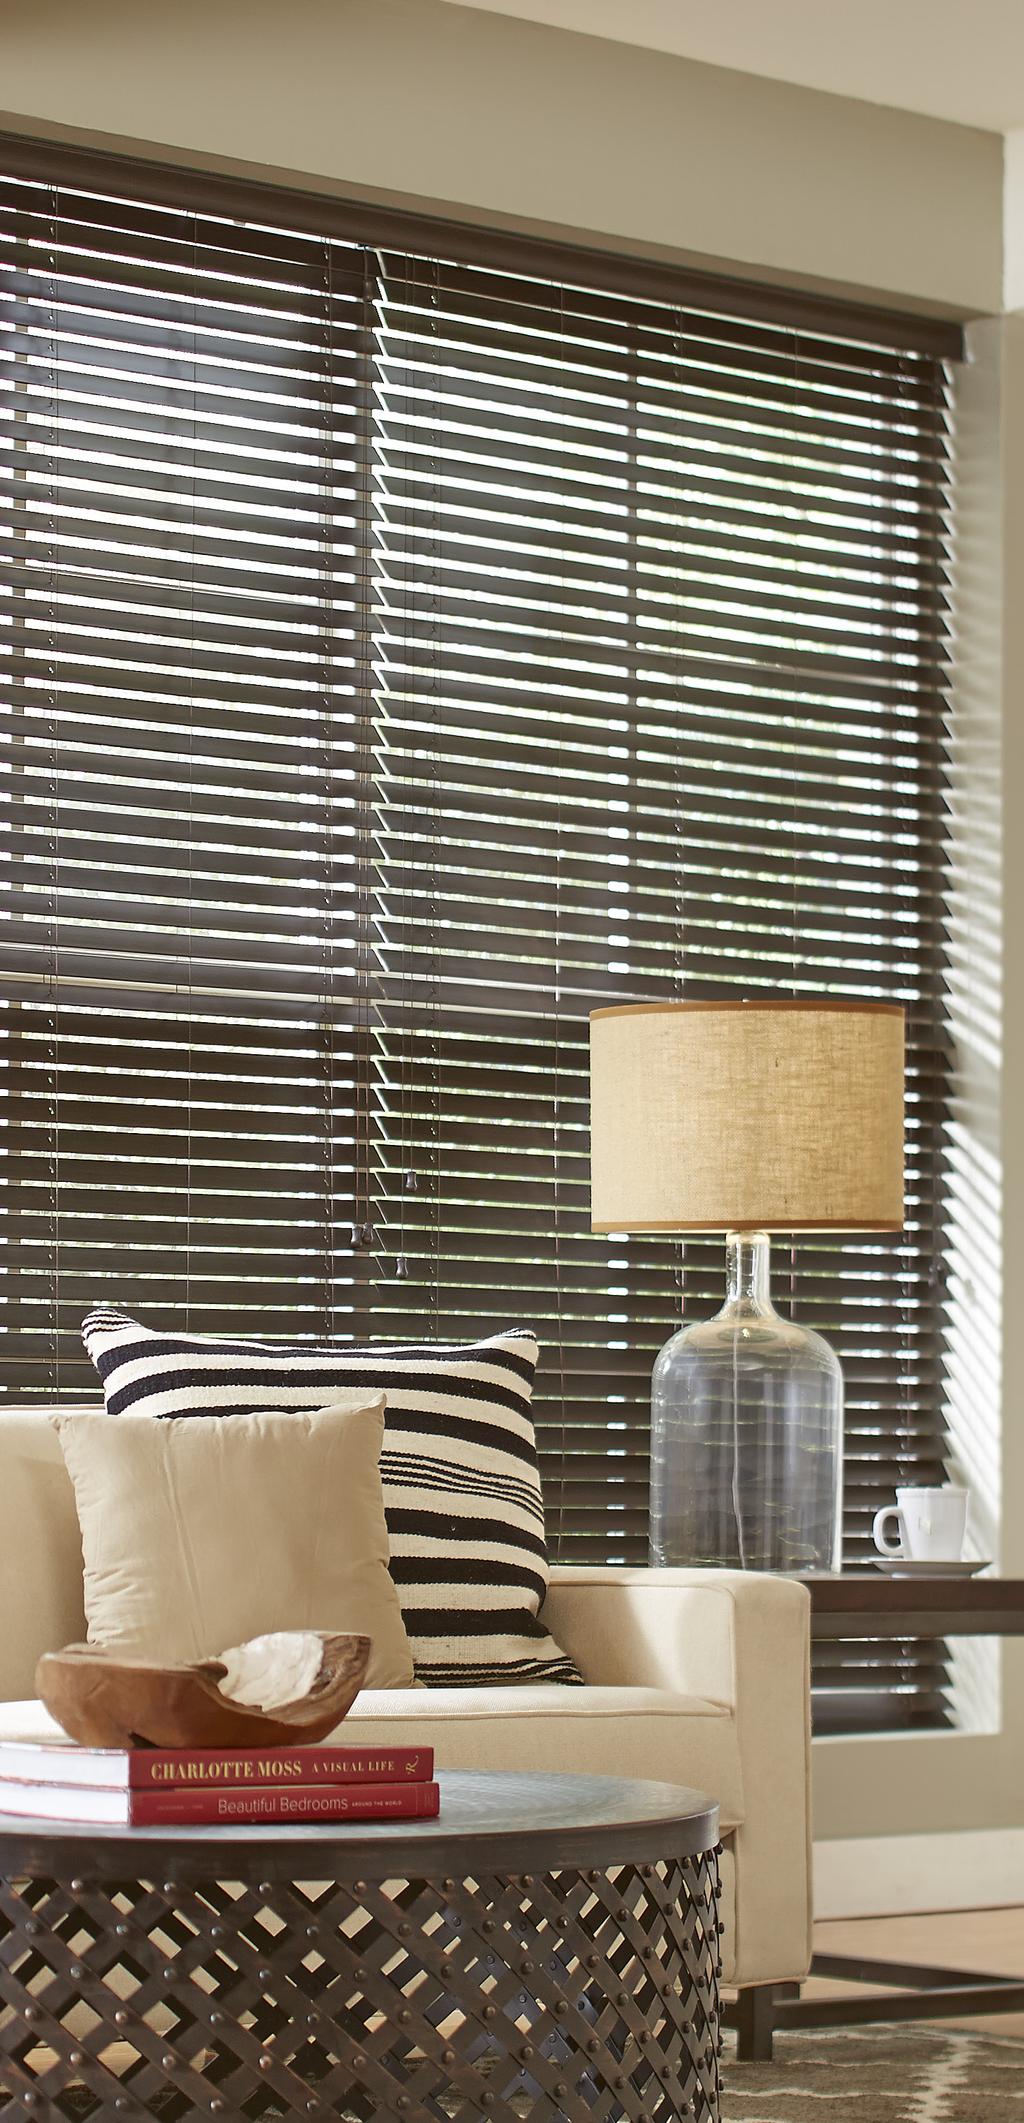 2½-inch Premium Faux Wood Blinds Direct Ship Privacy slats prevent light from filtering through when closed 2½" wide slats allow greater views Smooth operating tilt cord light control Wood grain